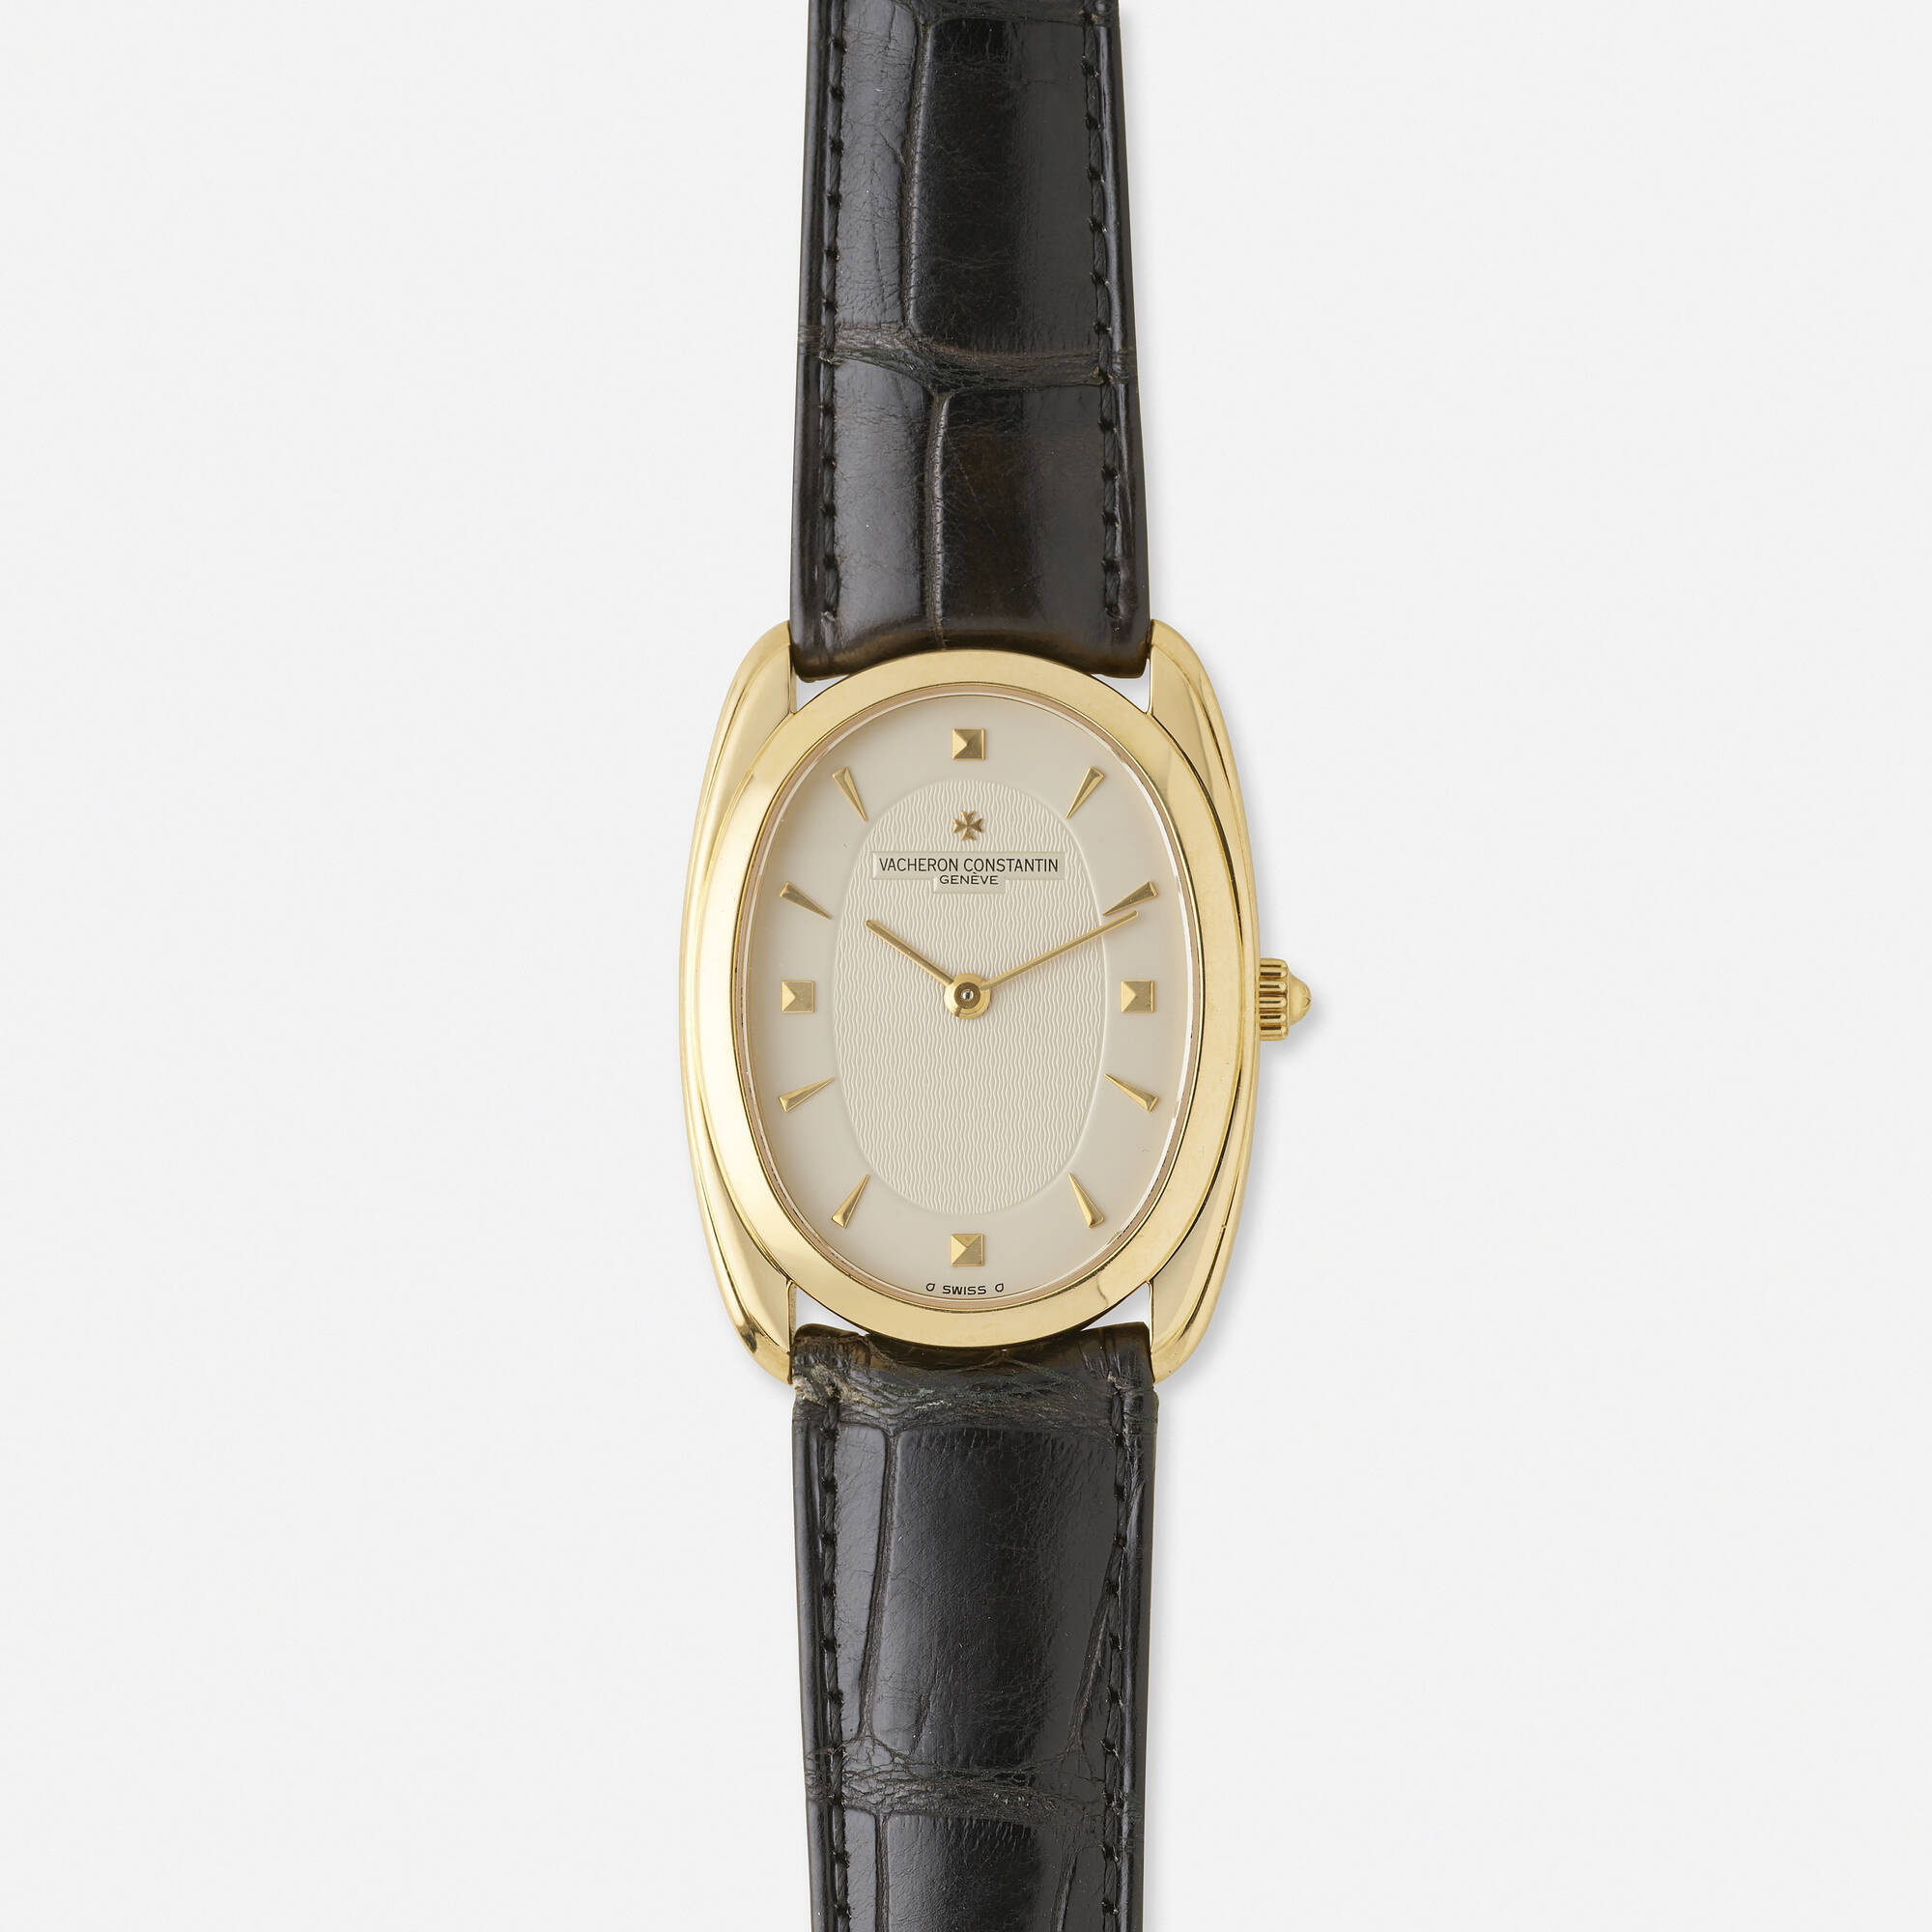 459: VACHERON CONSTANTIN, gold Store 31110/000J Watches: Ref. wristwatch, leather Auctions \'Les < < Auctions September Historiques\' A 30 Rago | 2021 Collection, and Prominent